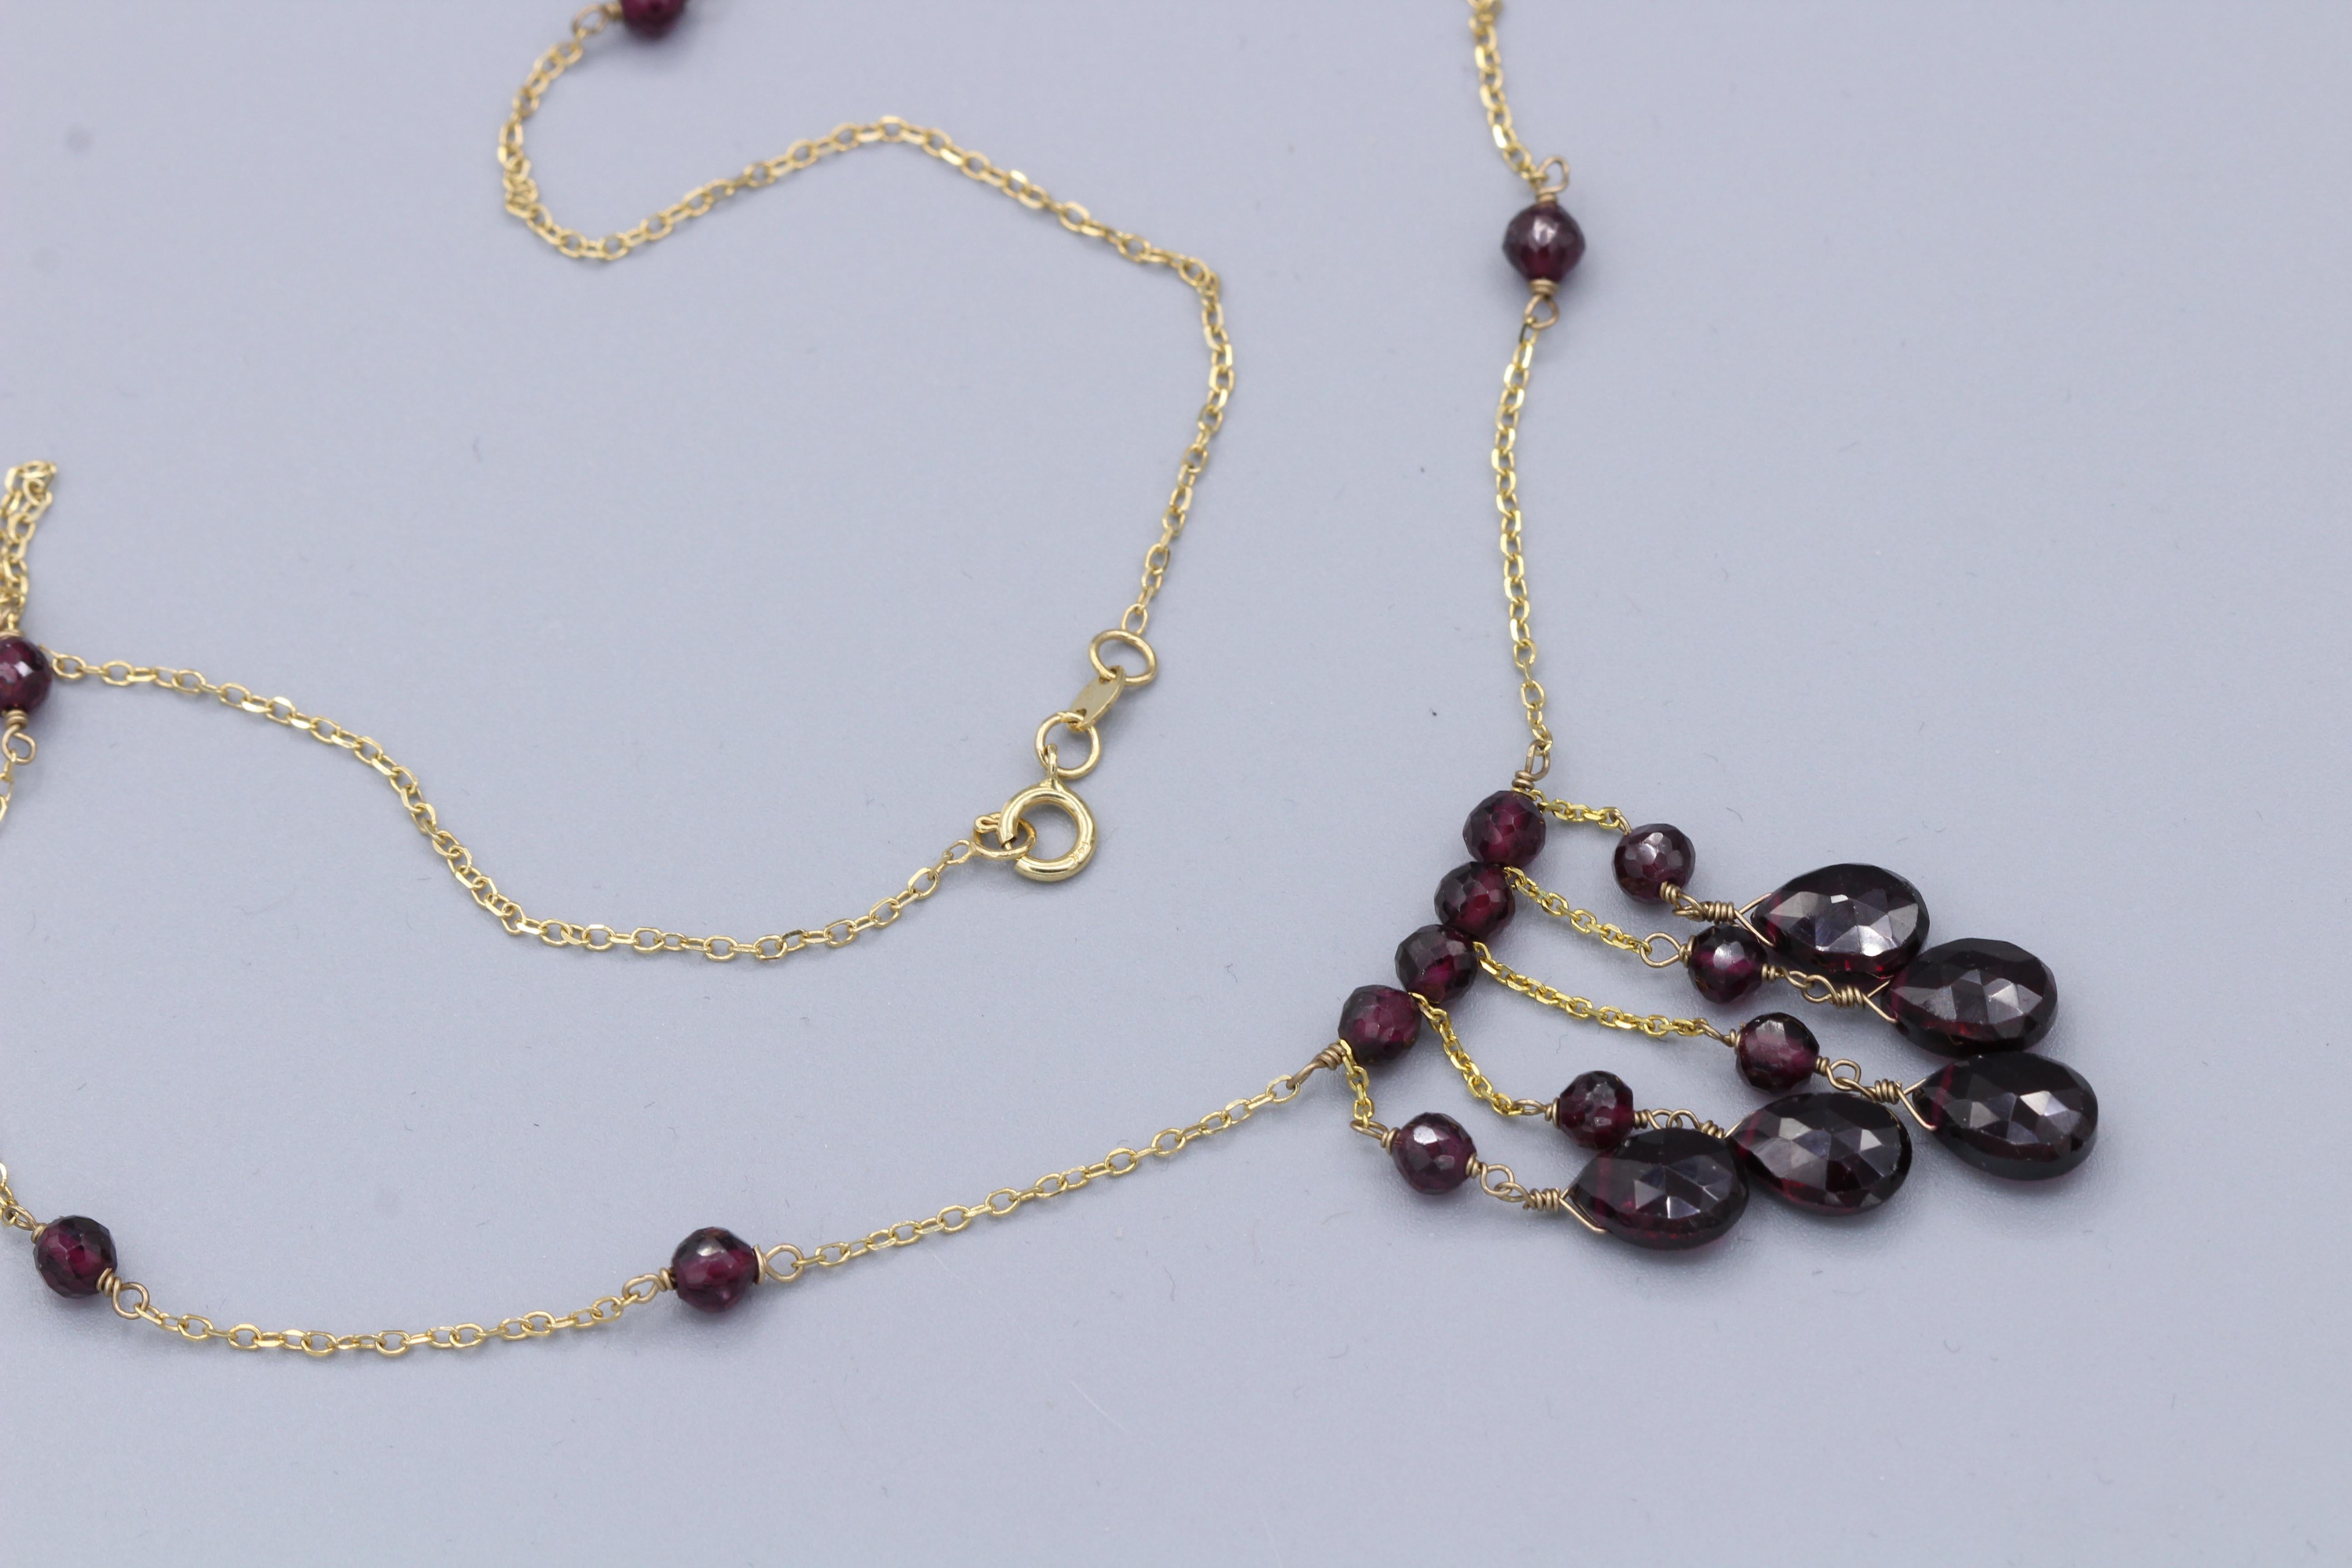 Garnet Dangle Bead Necklace 14 Karat Yellow Gold Dangling Garnet and Beads In New Condition For Sale In Brooklyn, NY